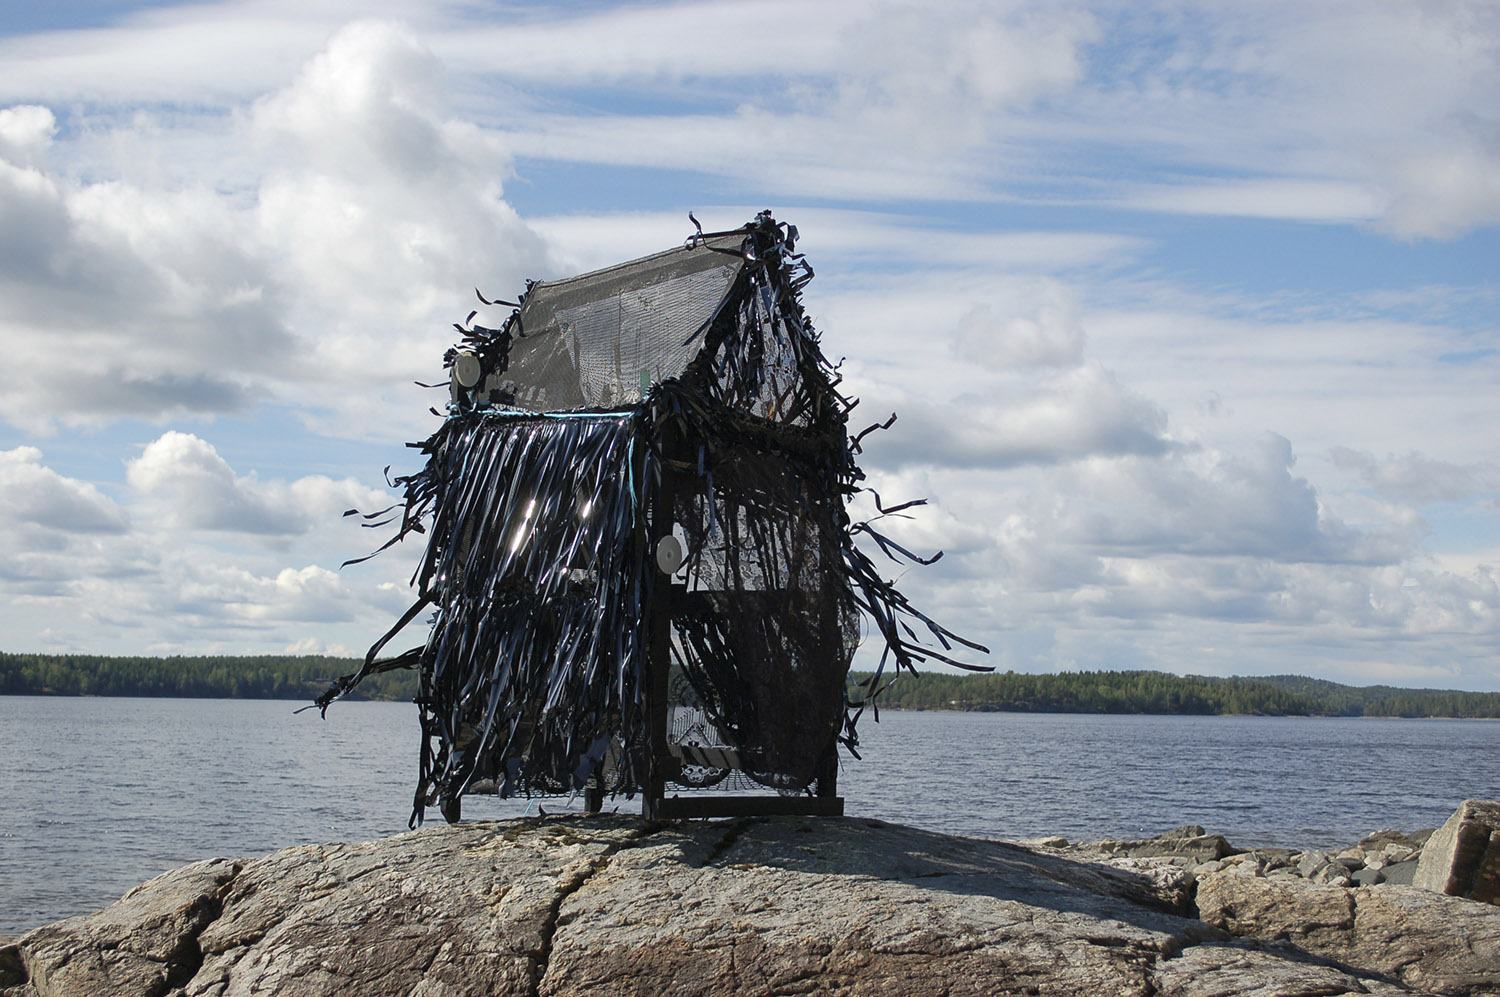 A photograph of a skeletal desolate shack on a rock in the edge of an expanse of calm water in the background.